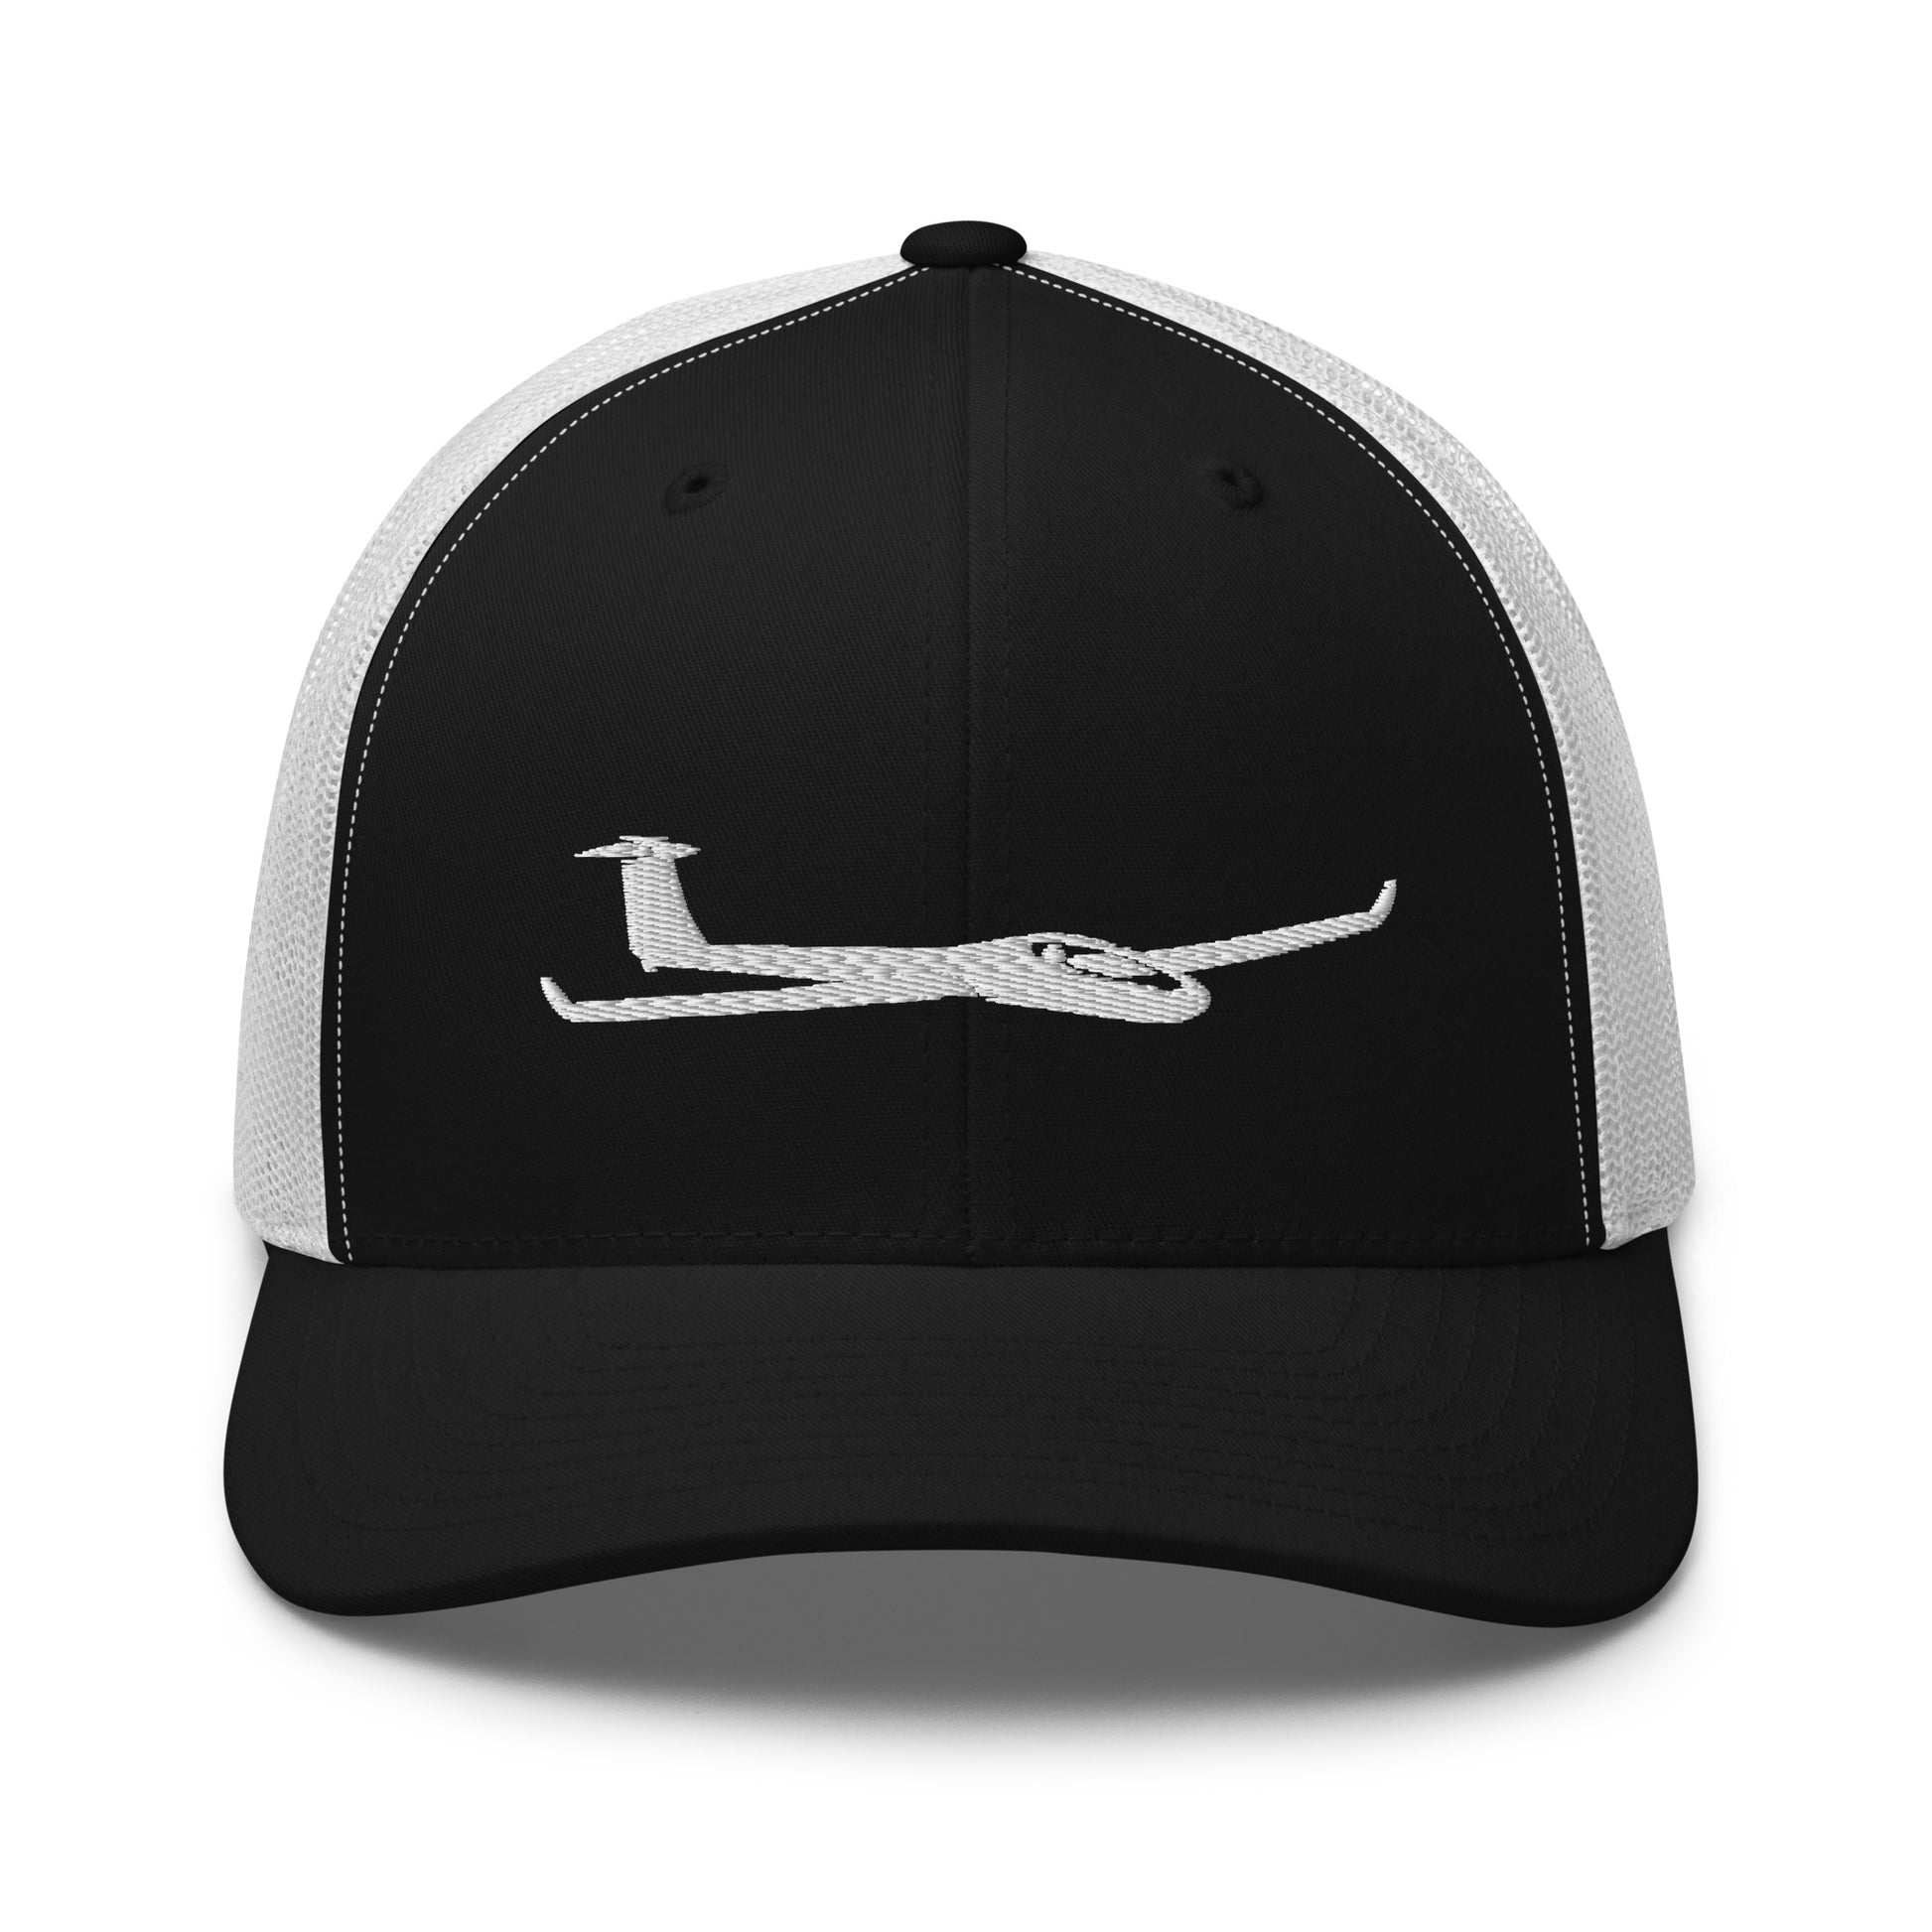 Glider Trucker Hat.  A black and white Yupoong 6606 hat with a white glider embroidered on the front panel.